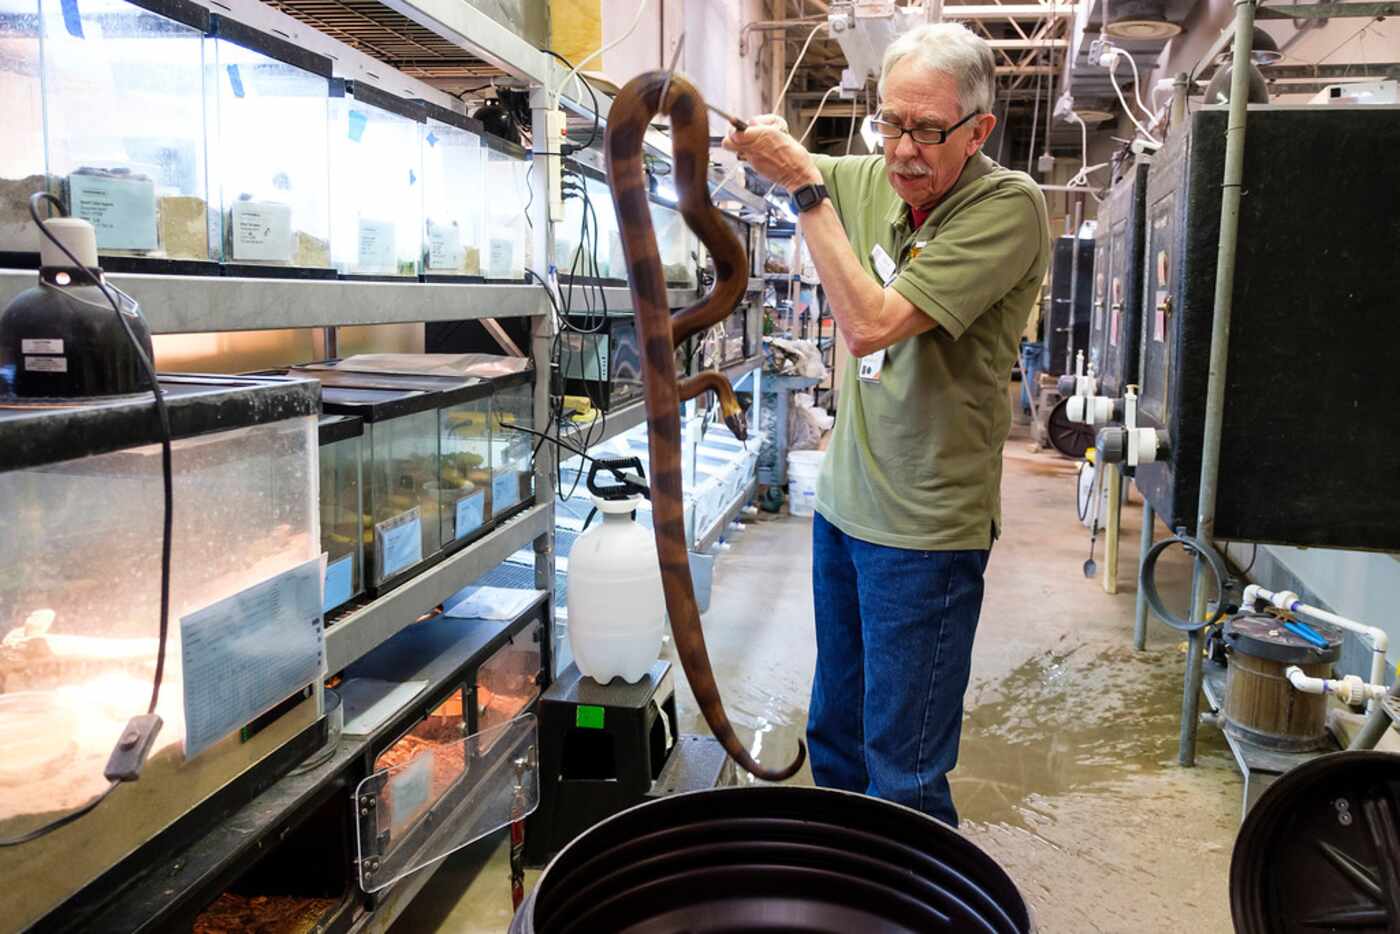 Bob Butsch, 71, lifts a snake at the Dallas Zoo herpetarium on March 13.